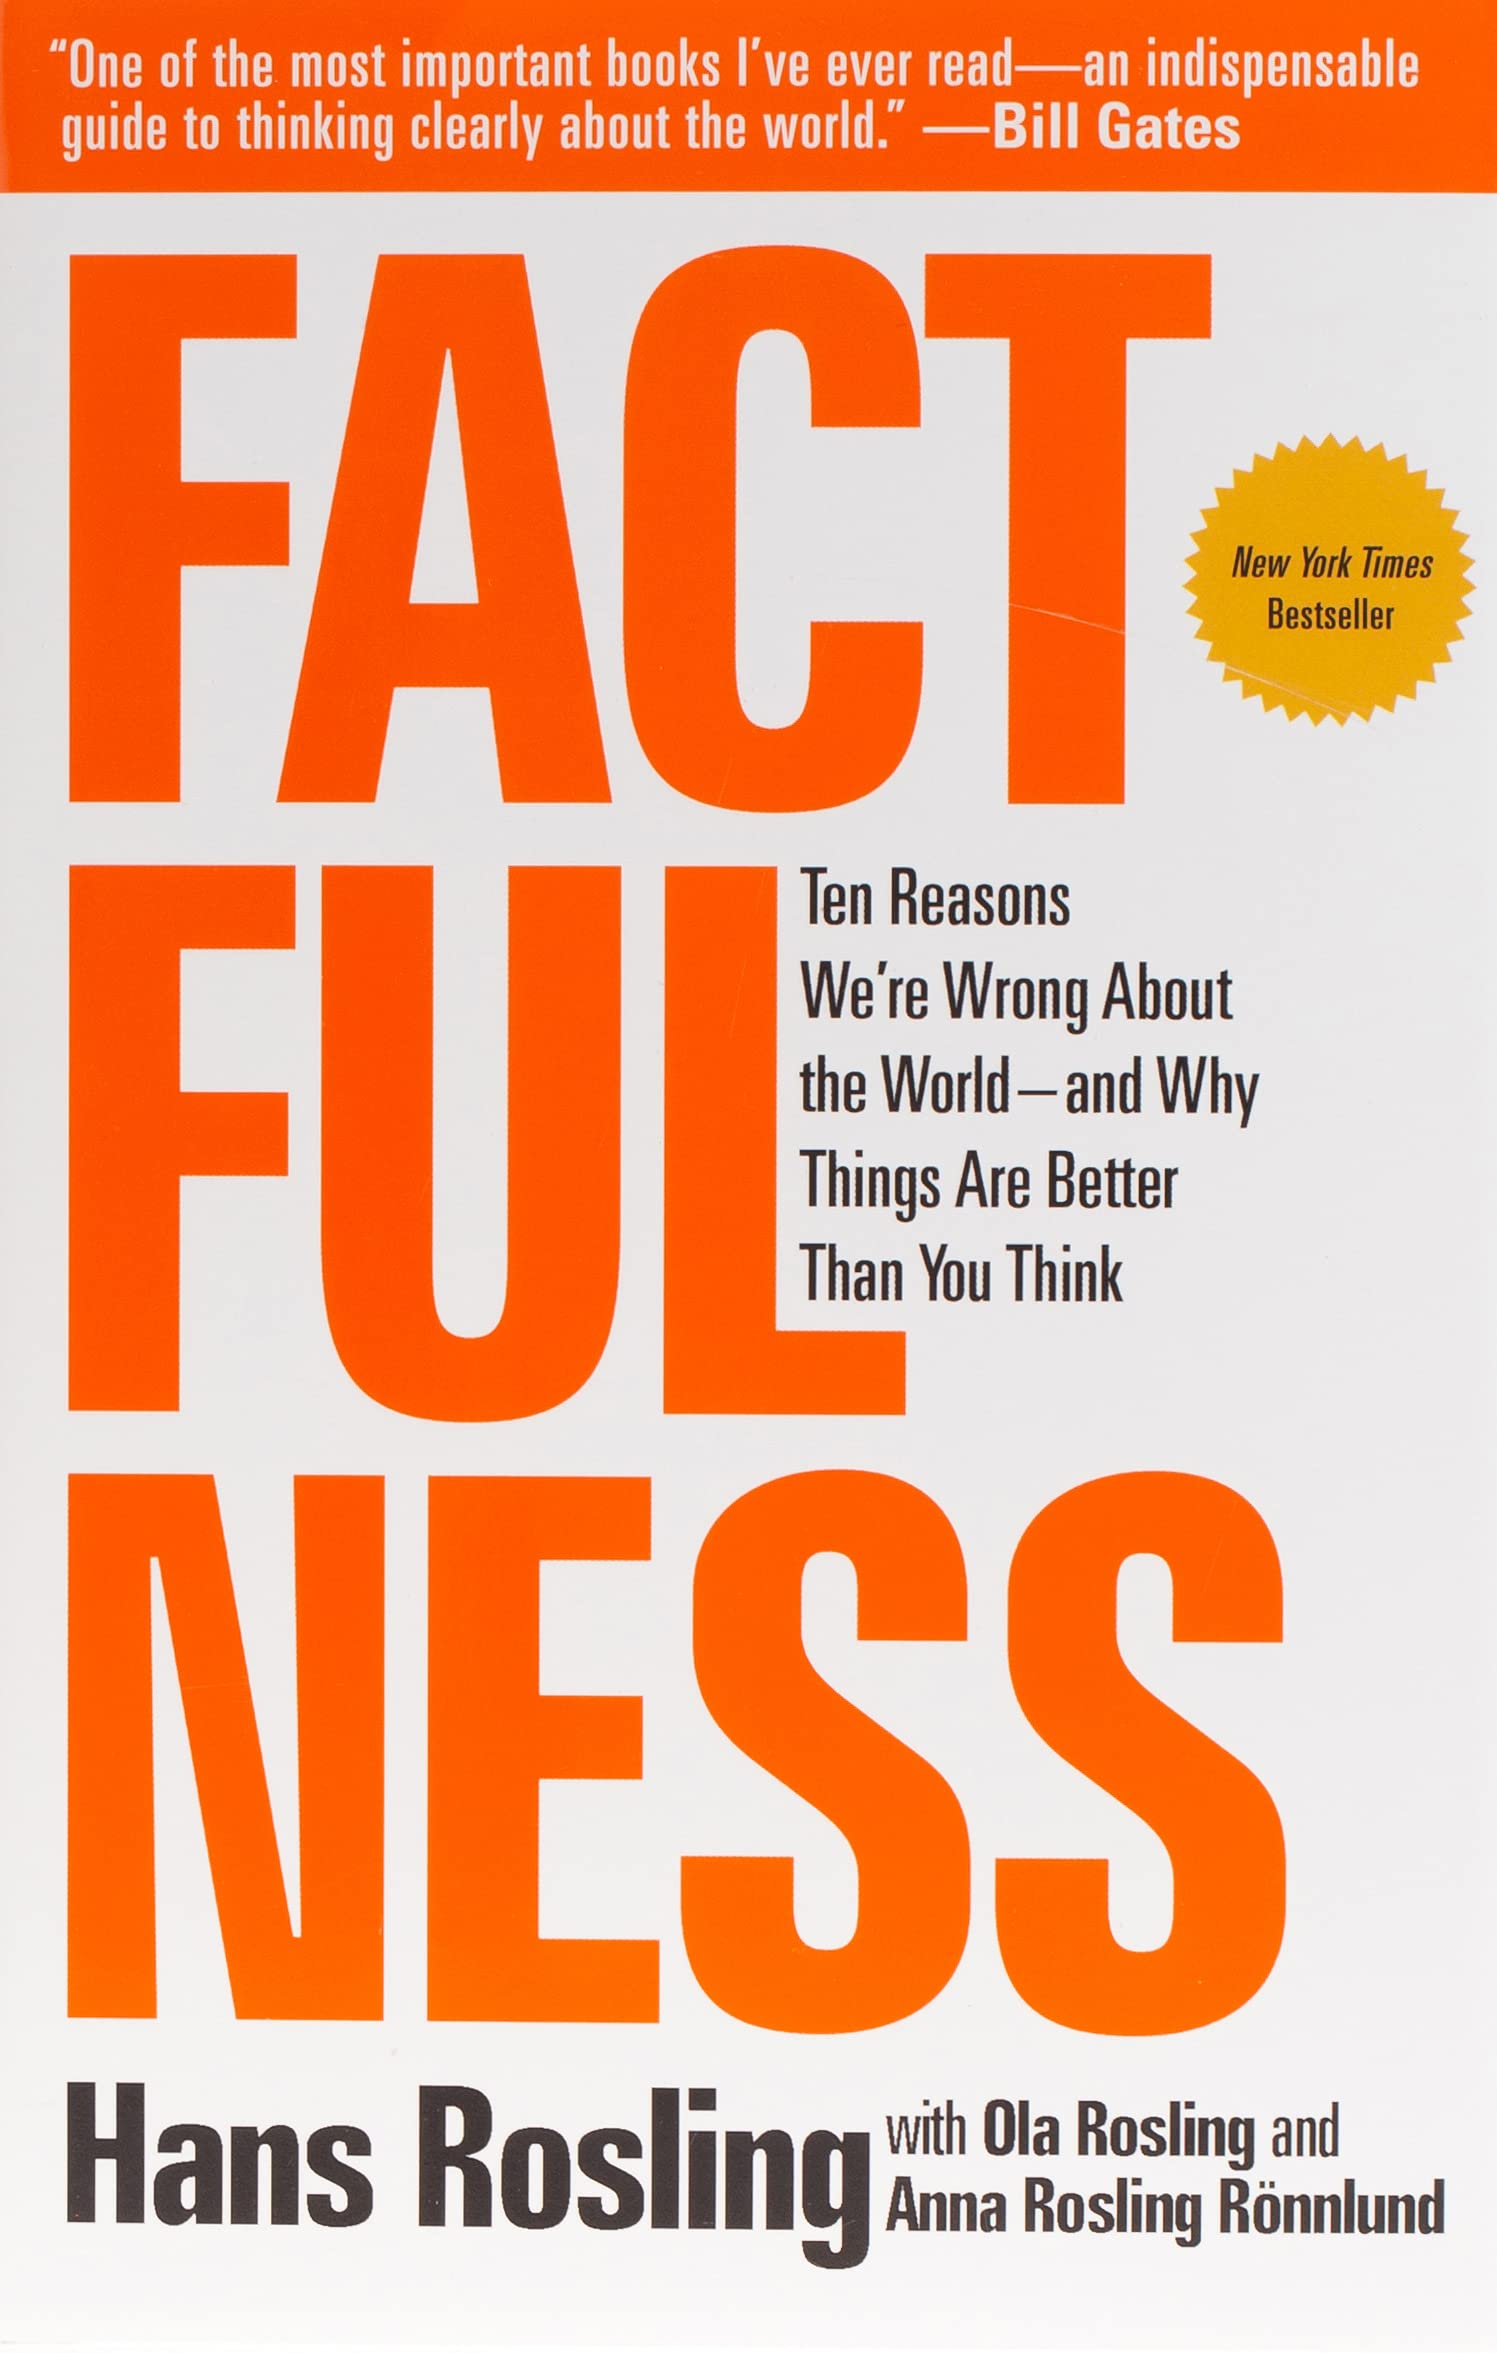 <p>This book investigates the thinking patterns and tendencies that distort people's perceptions of the world. Gates has <a href="https://www.gatesnotes.com/Books/Factfulness">called it</a> "one of the most educational books I've ever read."</p><p><strong><a href="https://www.amazon.com/Factfulness-Reasons-World-Things-Better/dp/1250107814">Buy it here >></a></strong></p>